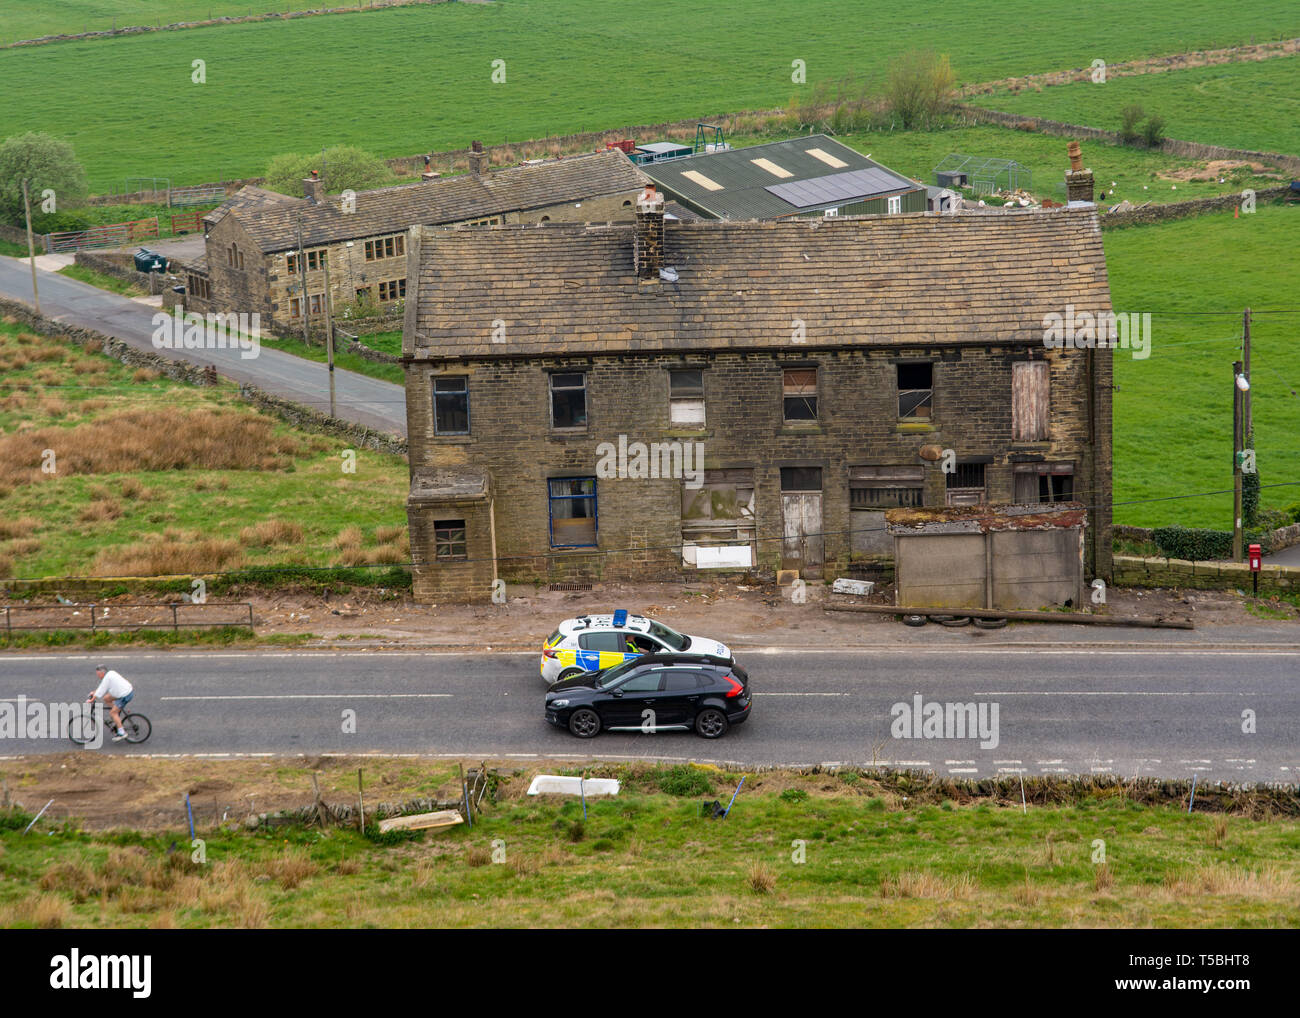 Marsden, Yorkshire, 23 April 19. A police car stops a civilian from driving past the road closed sign, as a cyclist rides past towards the wild fires. Stock Photo